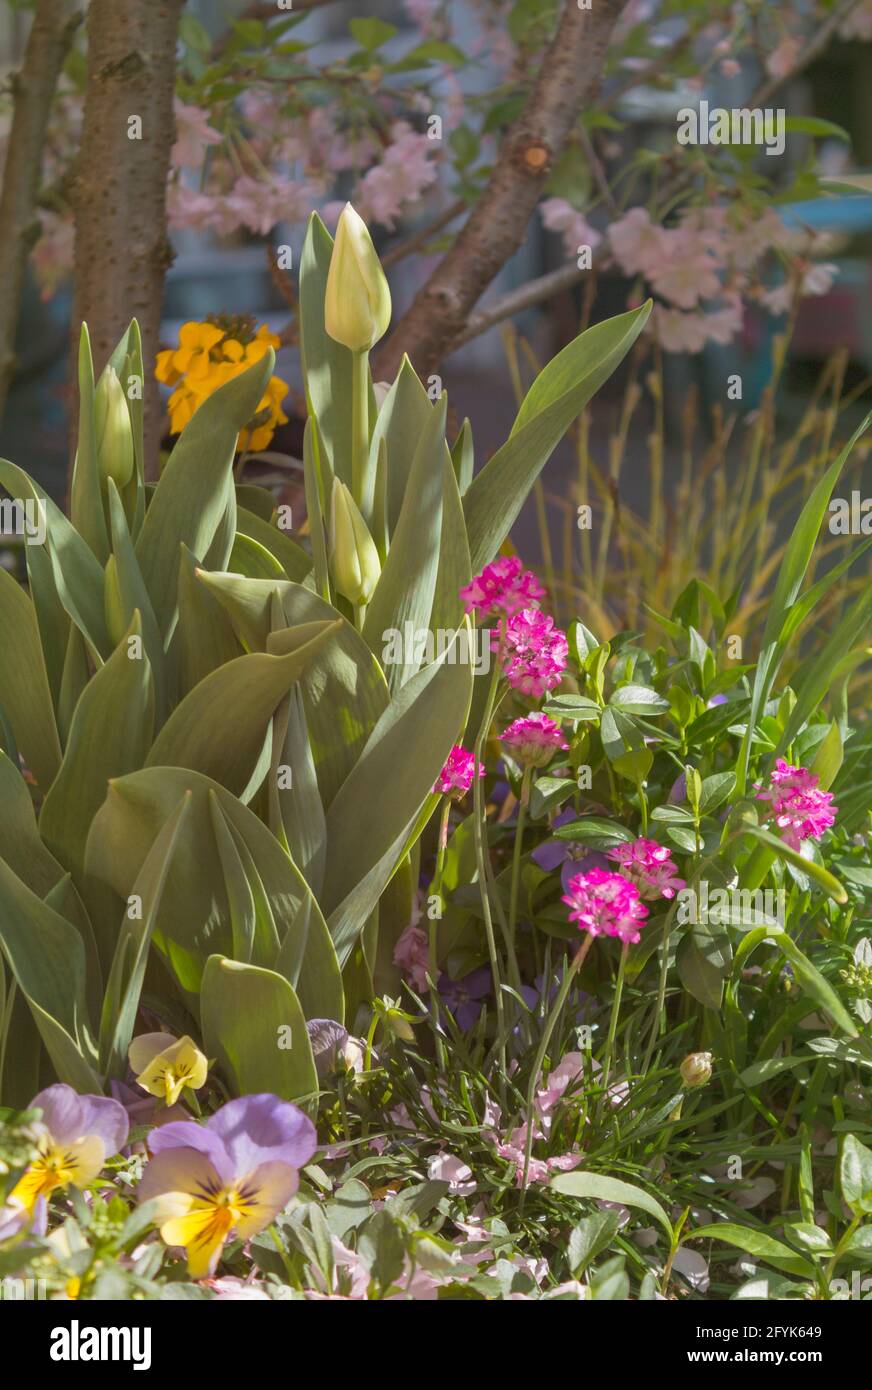 multicolored flower bed with tulips and others flowers. Urban landscaping. Gardening. Stock Photo